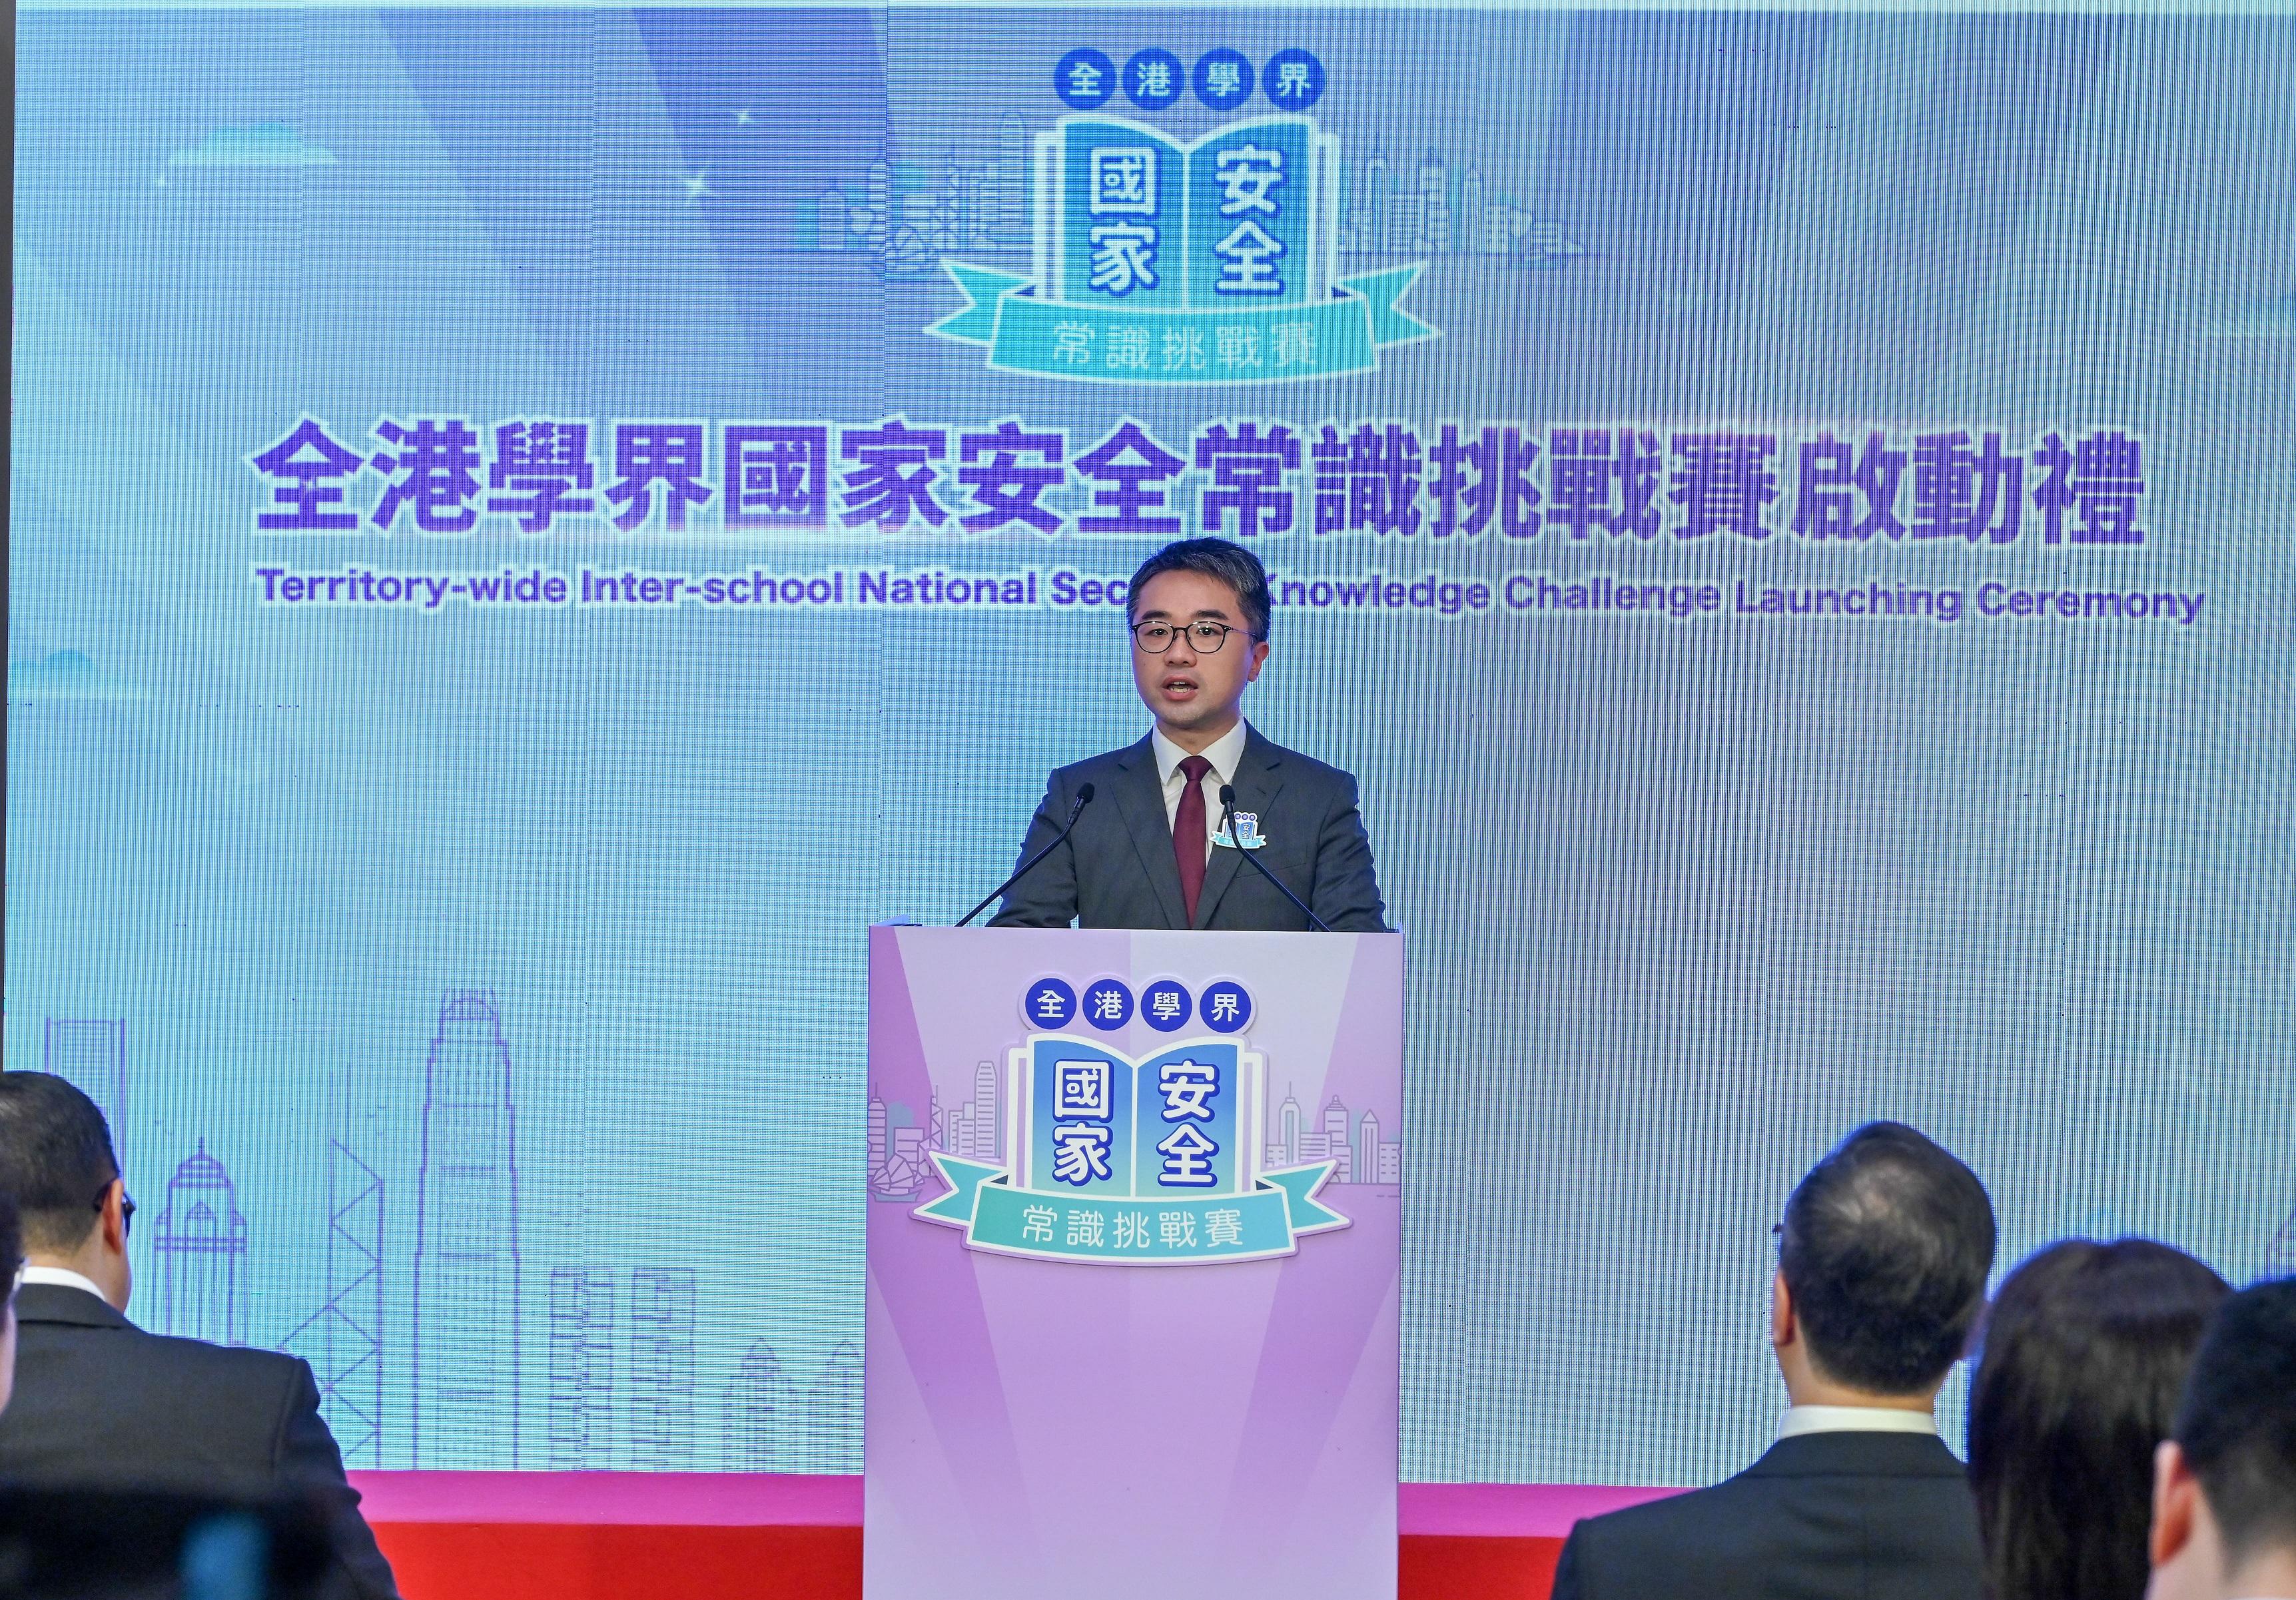 The Department of Justice, the Security Bureau, the Education Bureau and the Hong Kong Shine Tak Foundation jointly organised the Territory-wide Inter-school National Security Knowledge Challenge, and held a launching ceremony at the former French Mission Building today (December 3). Photo shows the Under Secretary for Education, Mr Sze Chun-fai, addressing the launching ceremony.